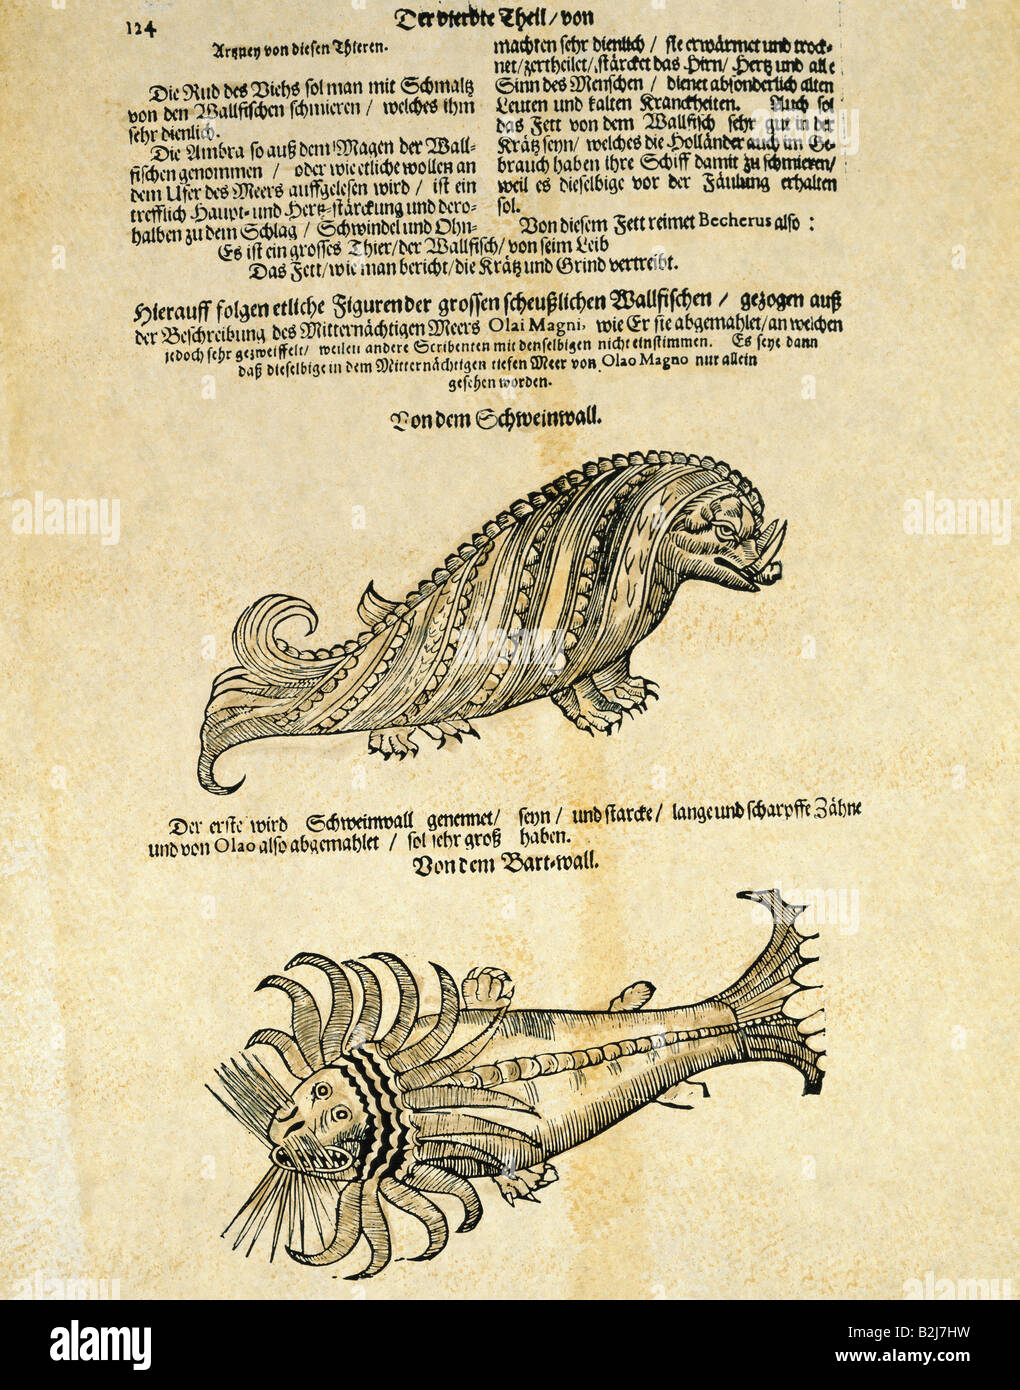 superstition, mythical creatures, hog wale and seal, woodcut, Michael Bernhard Valentini 'Museum museorum', printed by  Johann Adam Jungen, Frankfurt am Main, 1714, private collection, , Stock Photo